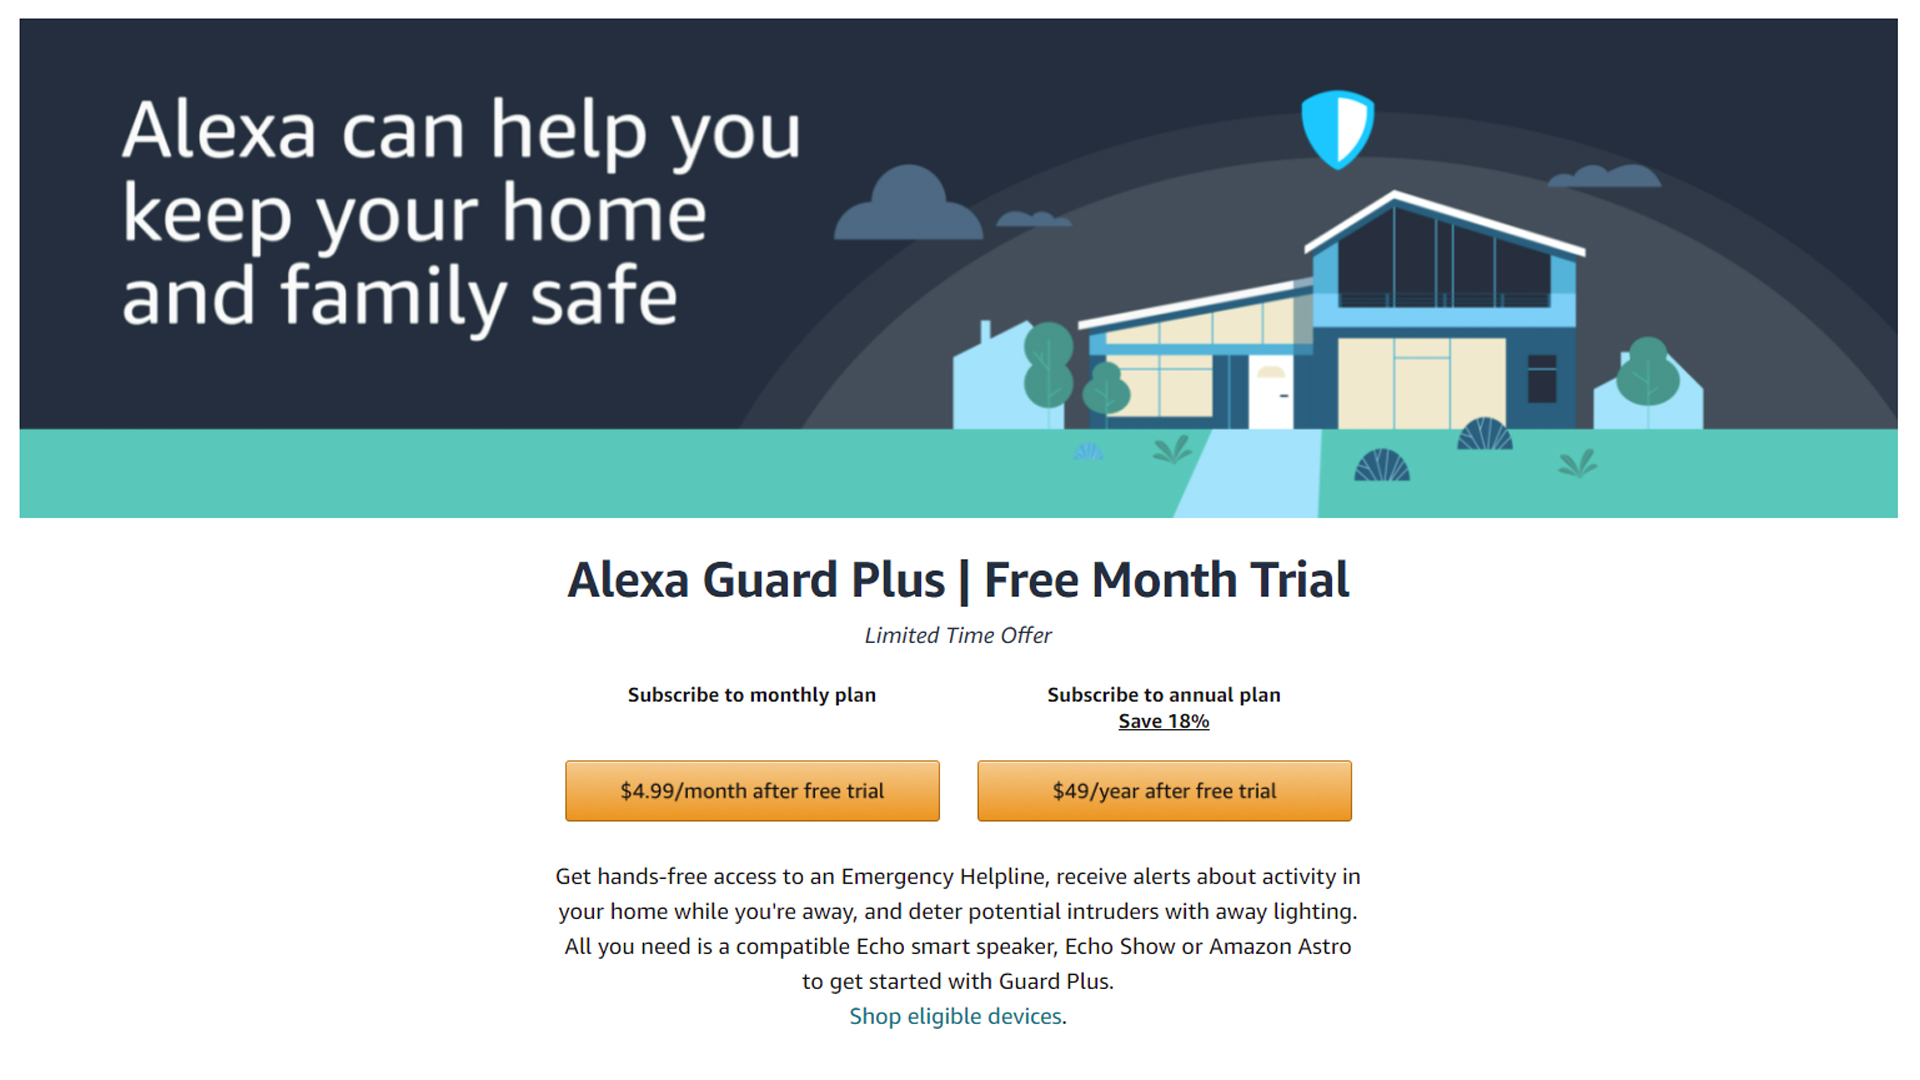 Signing up for Alexa Guard Plus on the web